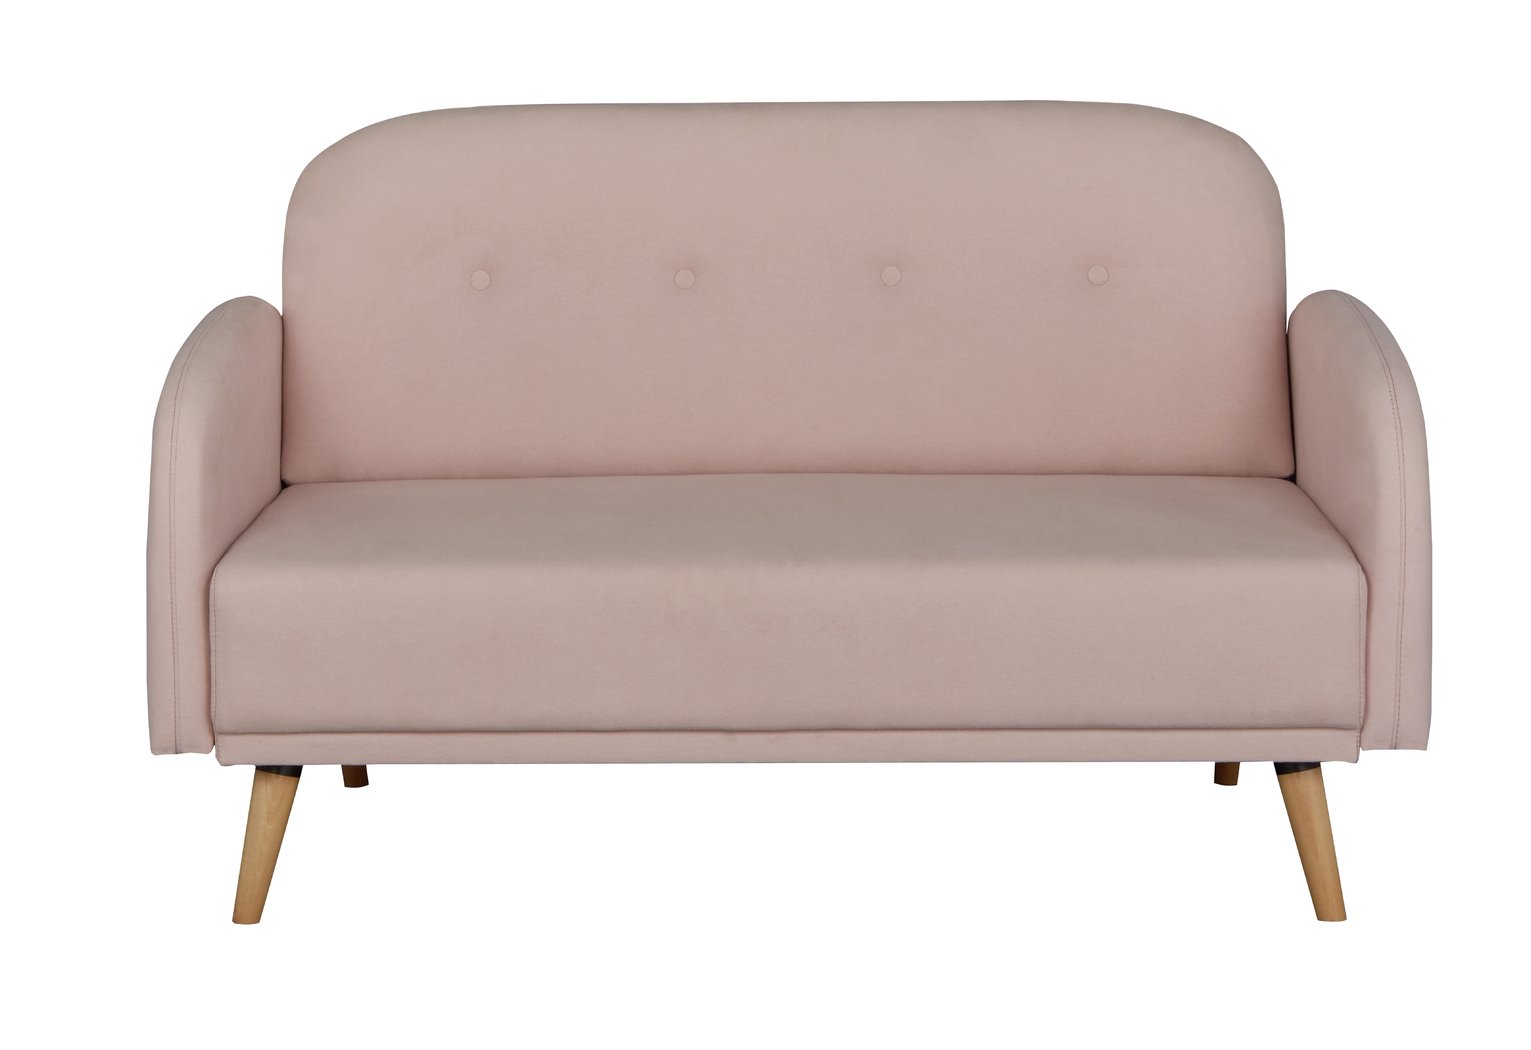 Argos Home Jemima 2 Seater Fabric Sofa in a Box Review